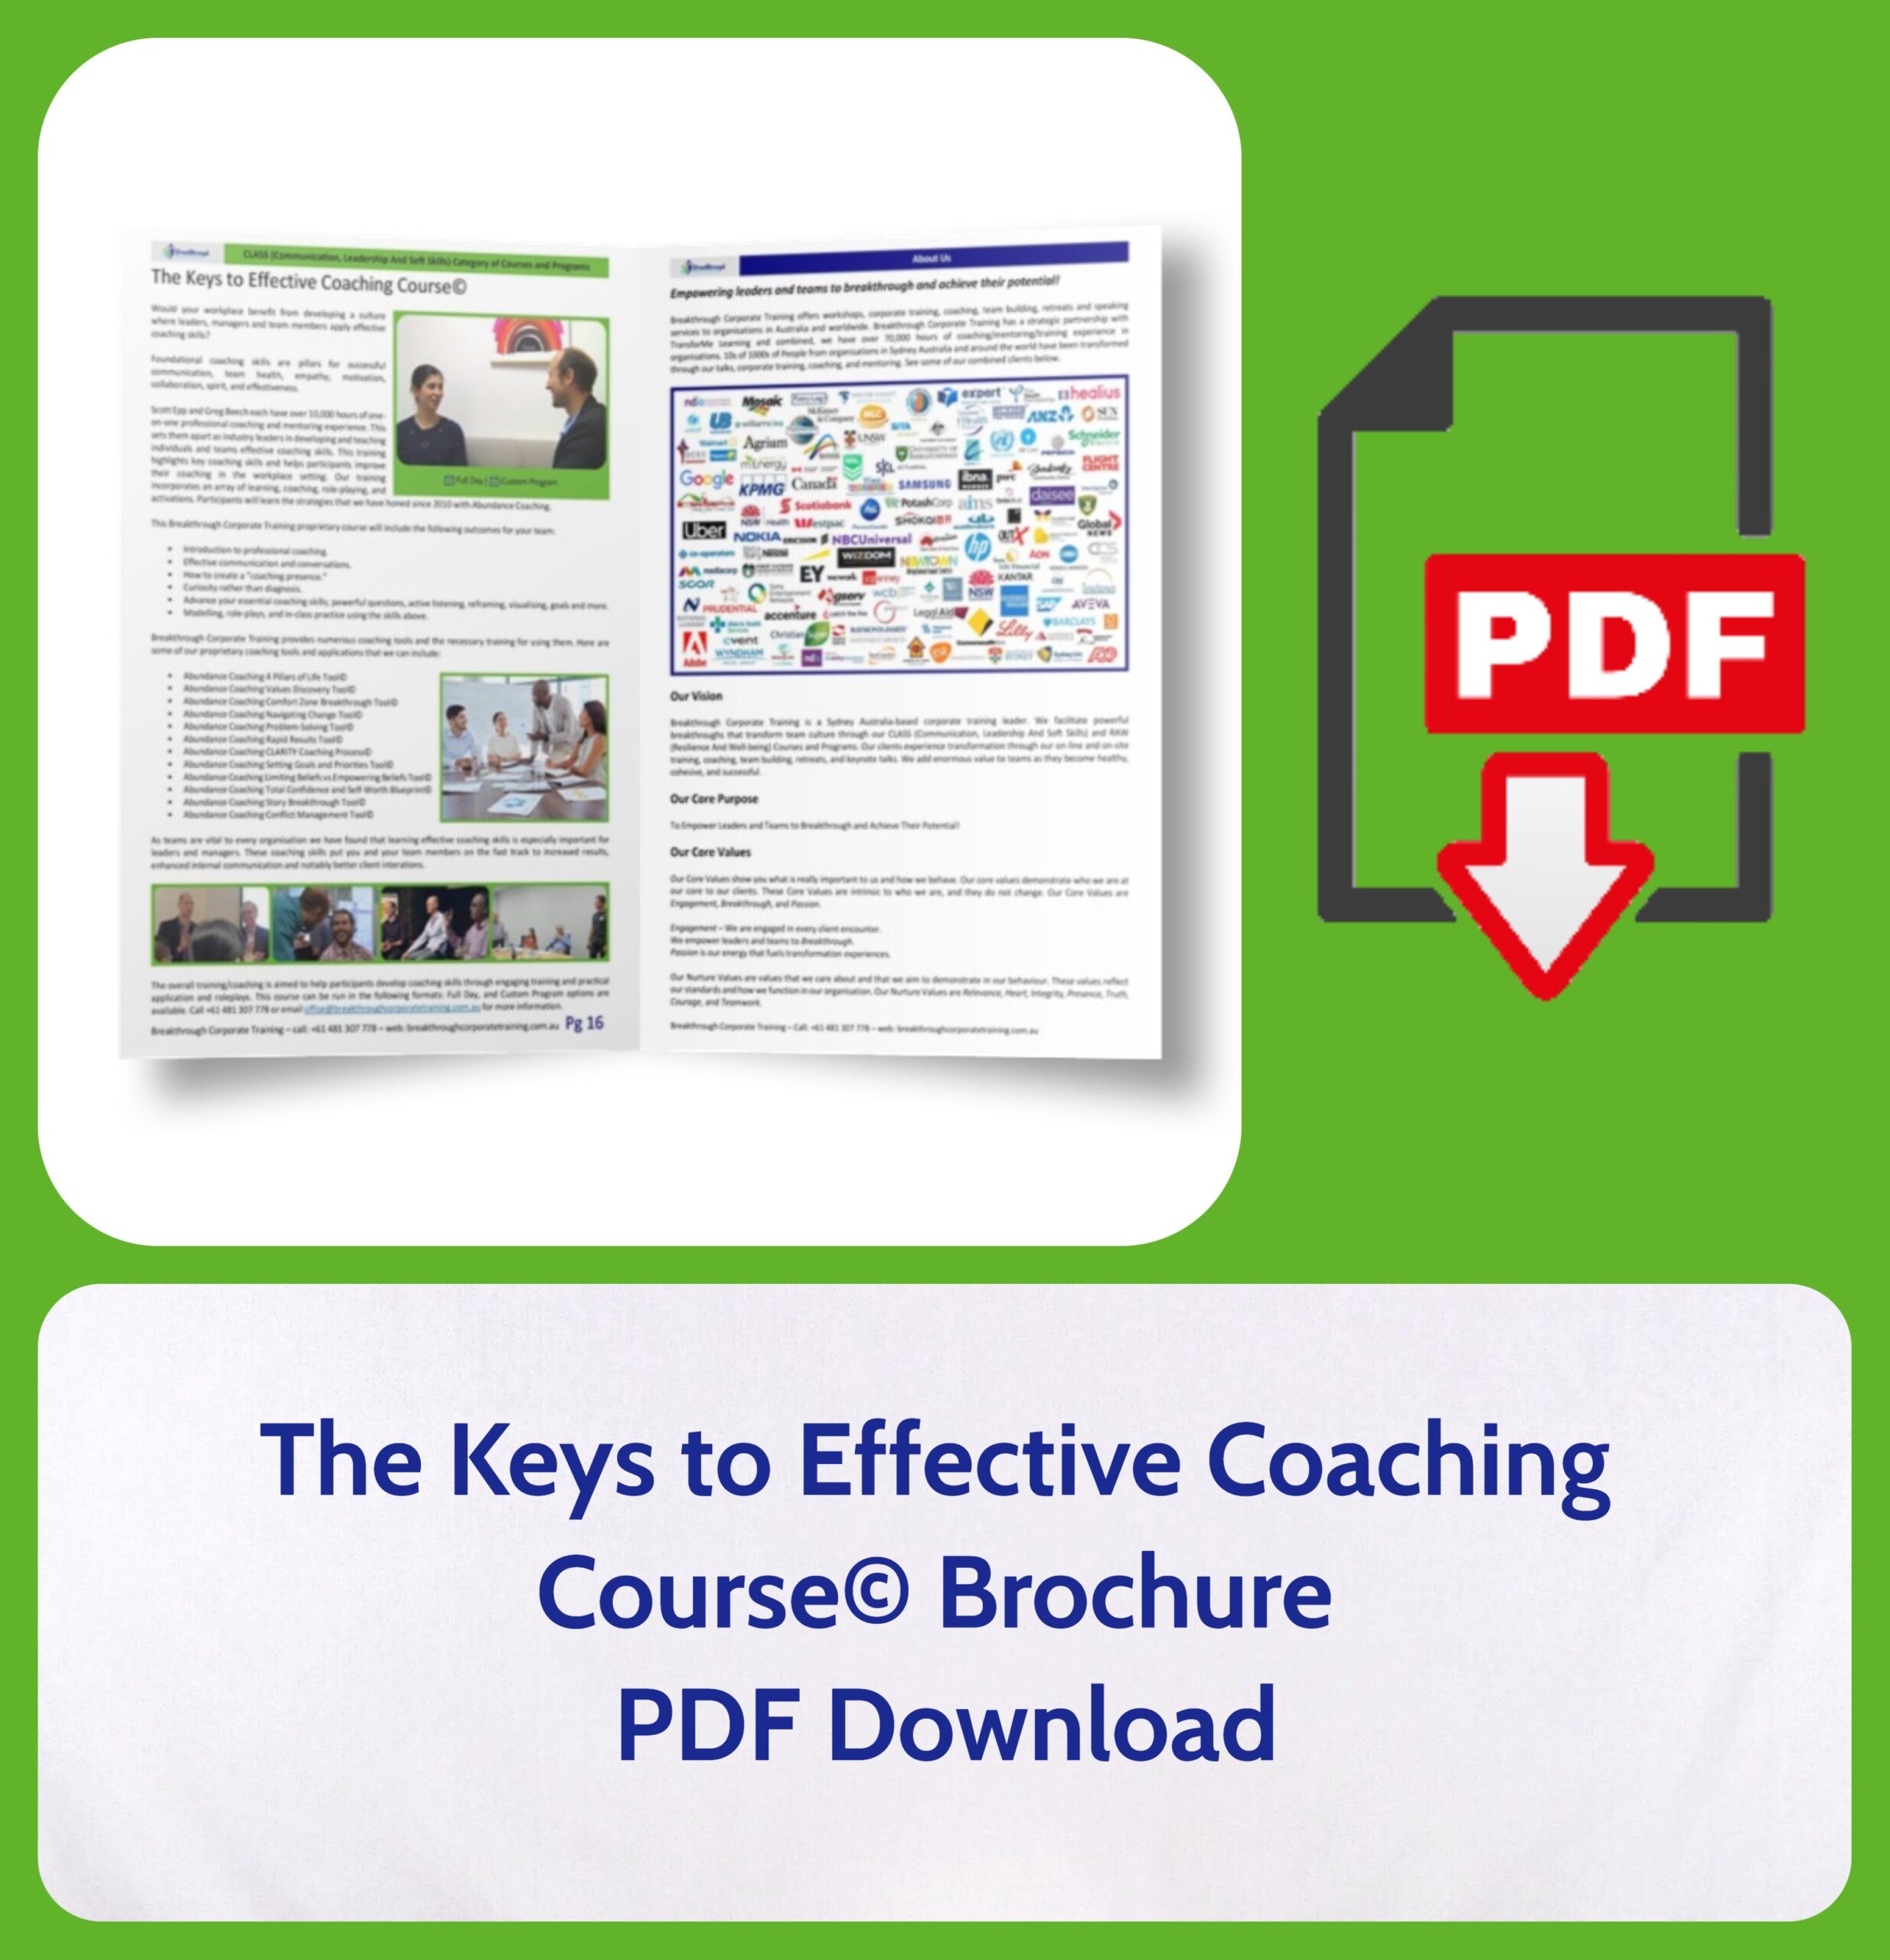 The Keys to Effective Coaching Course